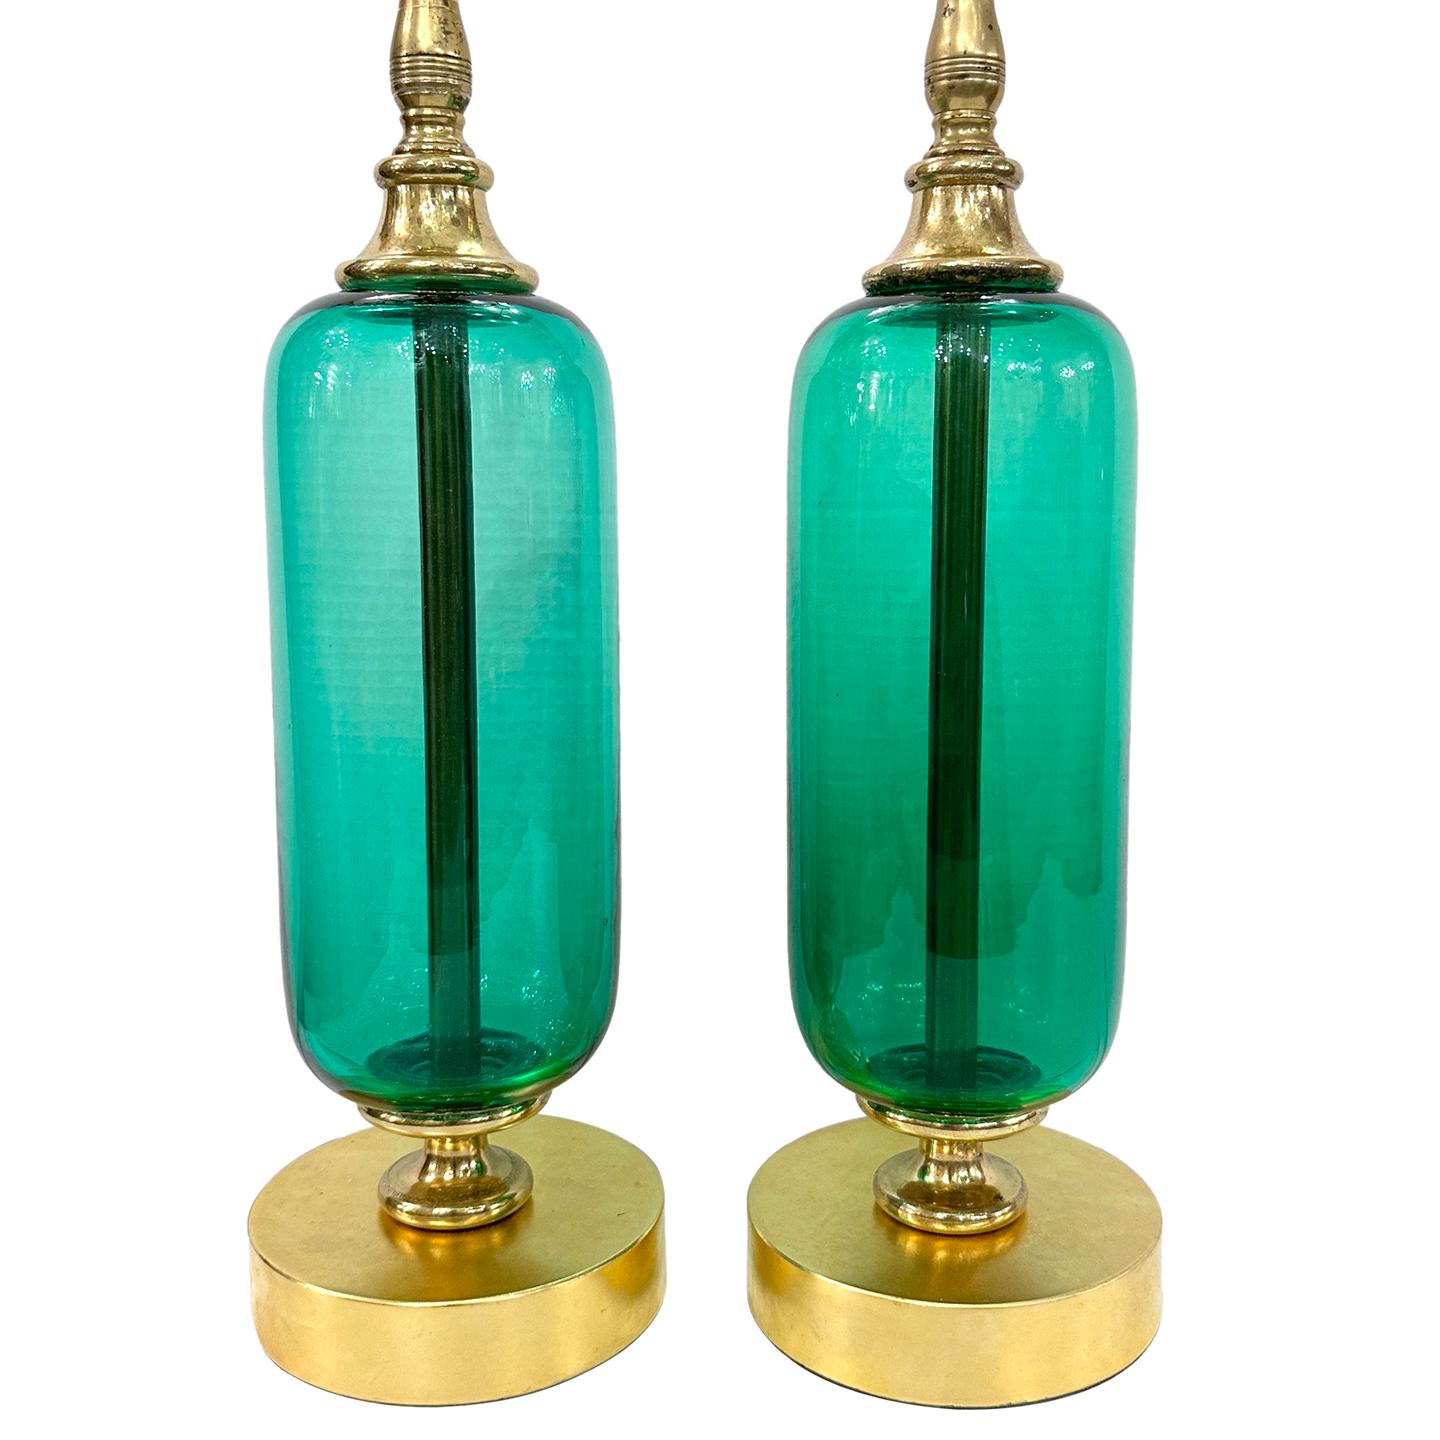 Pair of 1950's French blown glass table lamps.

Measurements:
Height of body: 16
Height to shade rest: 24